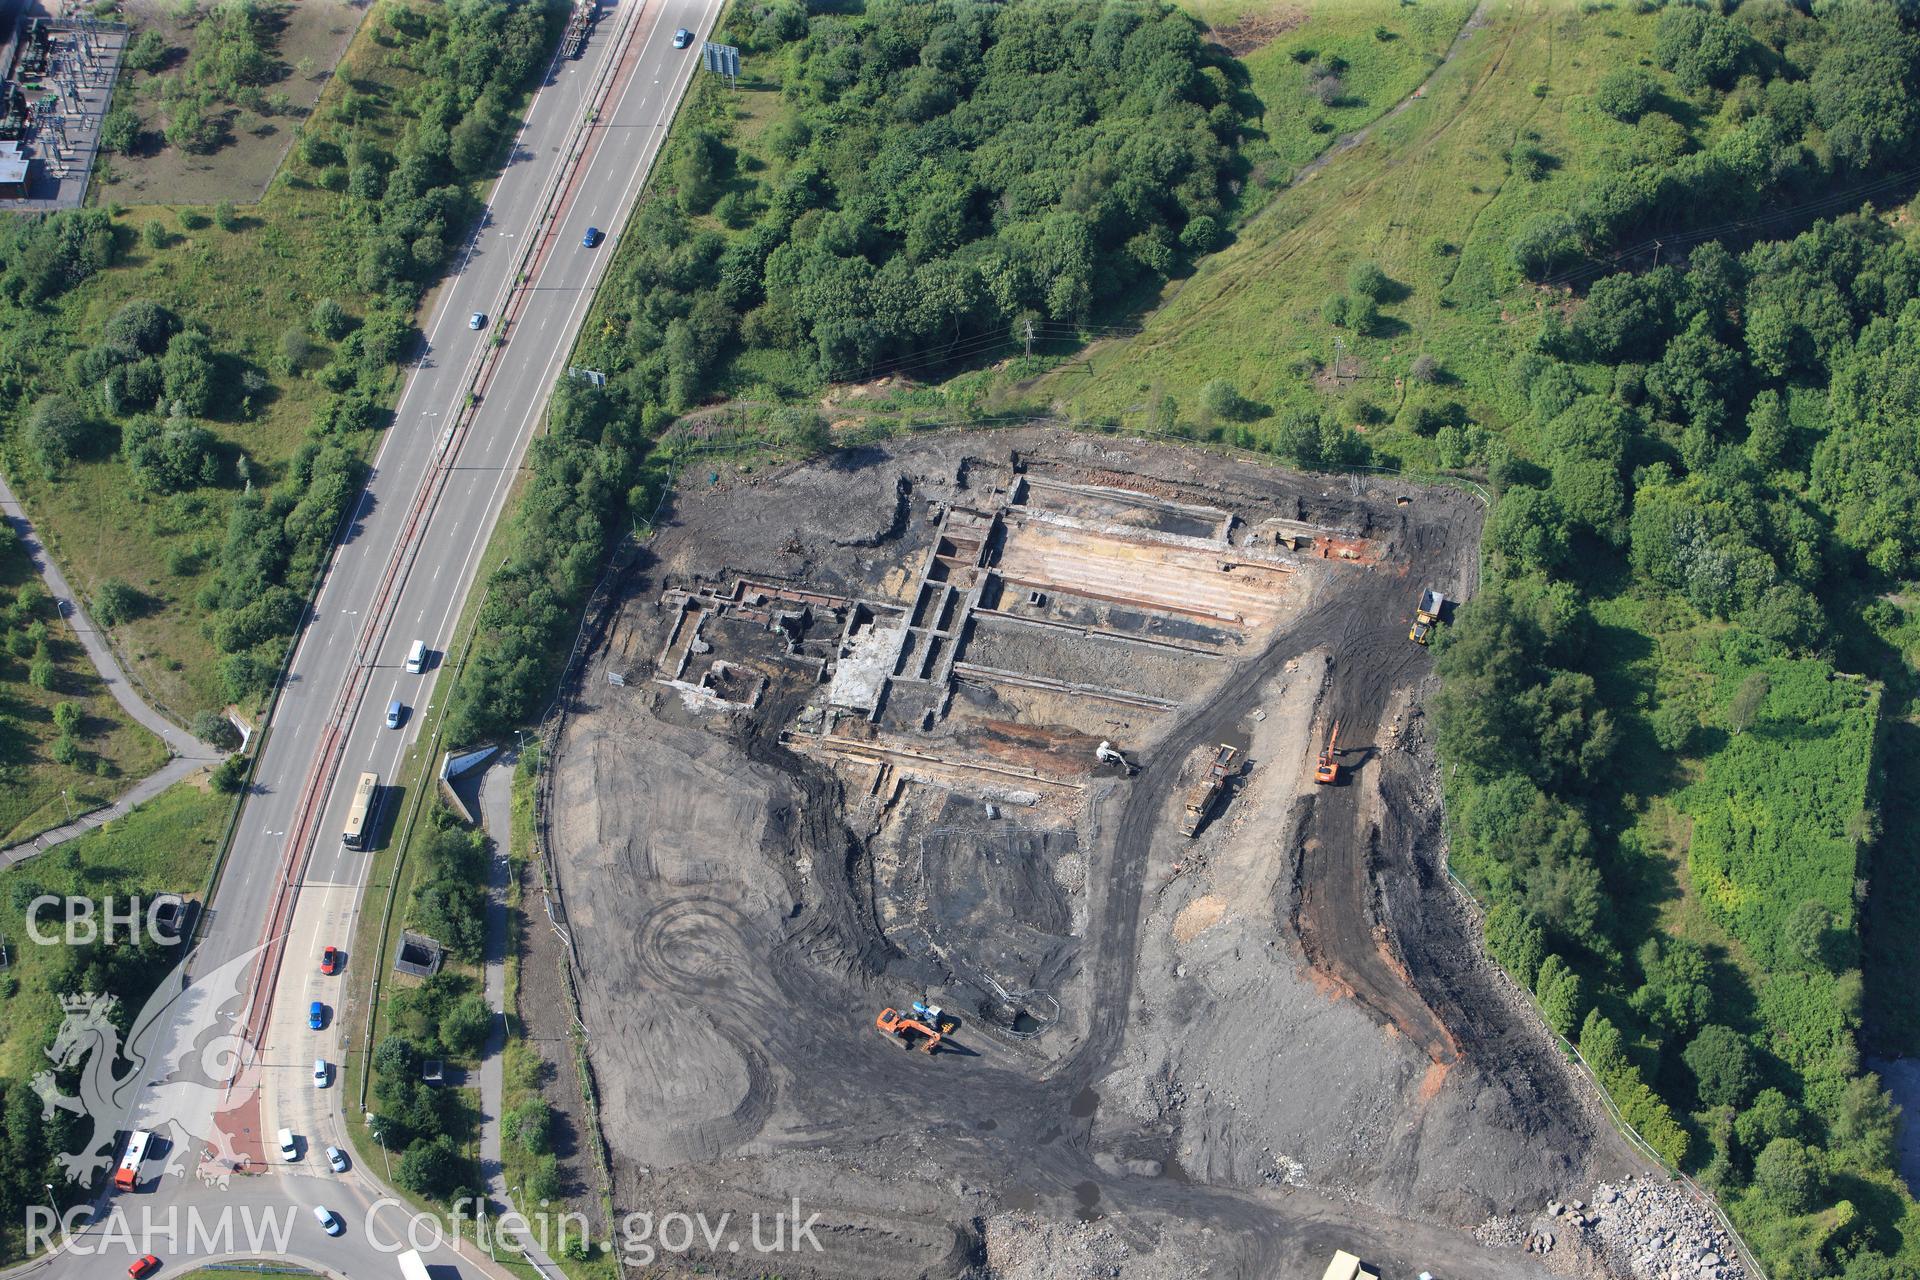 Site of former Rotax factory, Cyfarthfa Retail Park, and Cyfarthfa Ironworks including the remains of its blast furnaces, under excavation by Glamorgan-Gwent Archaeological Trust. Oblique aerial photograph taken during the Royal Commission?s programme of